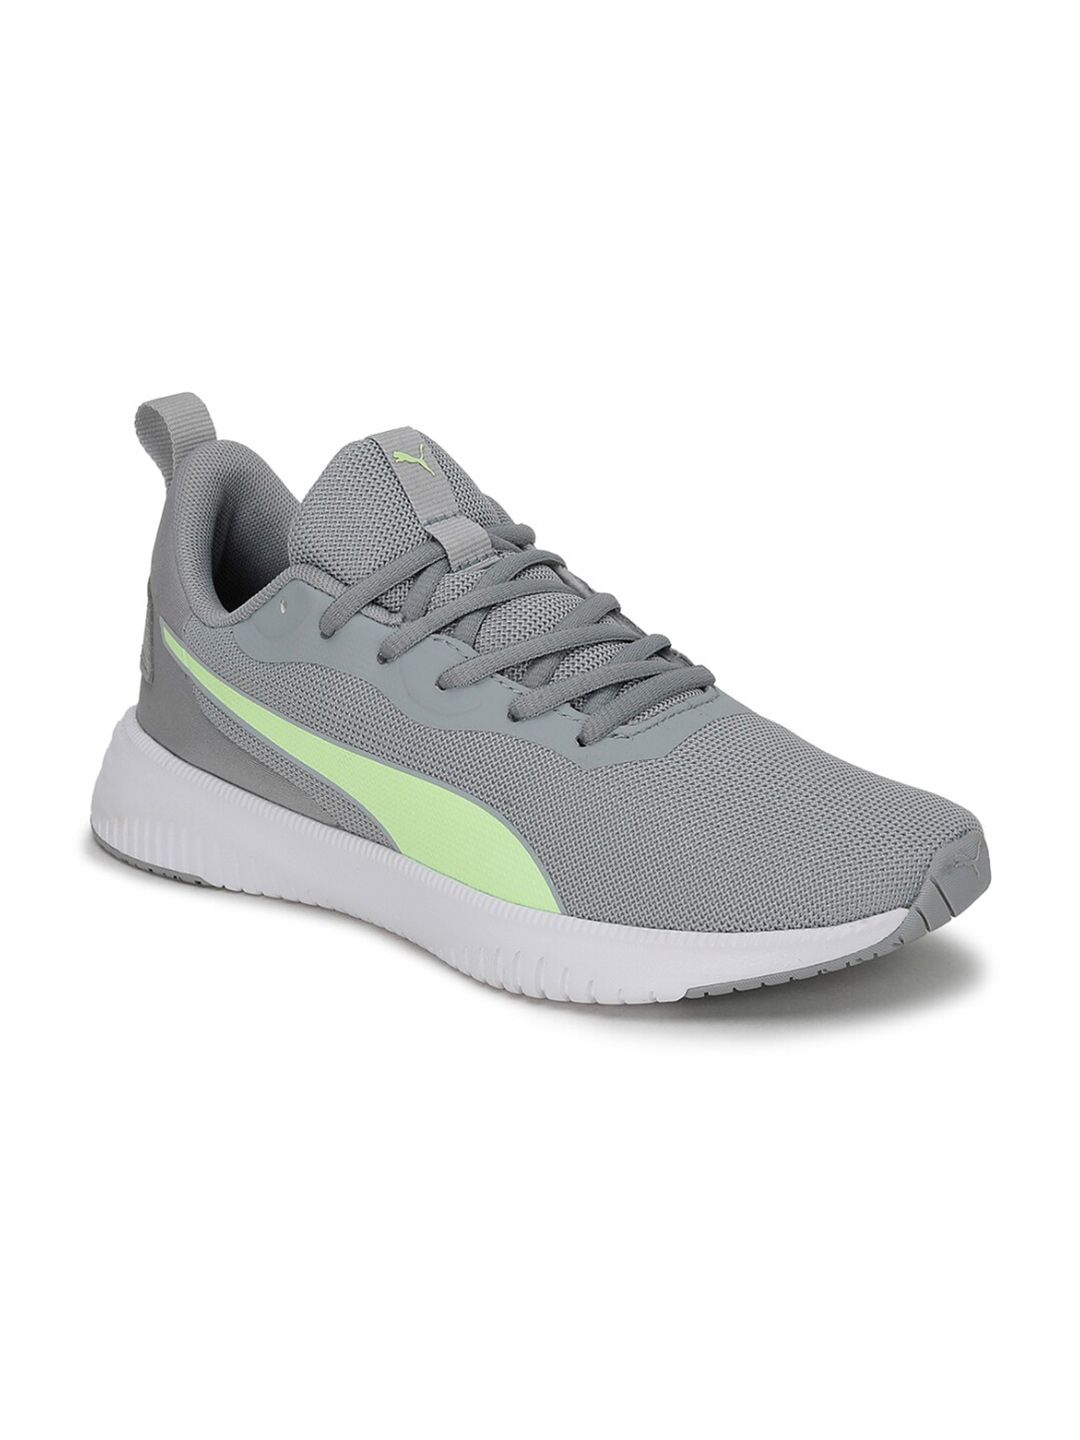 Puma Unisex Grey Sports Shoes Price in India